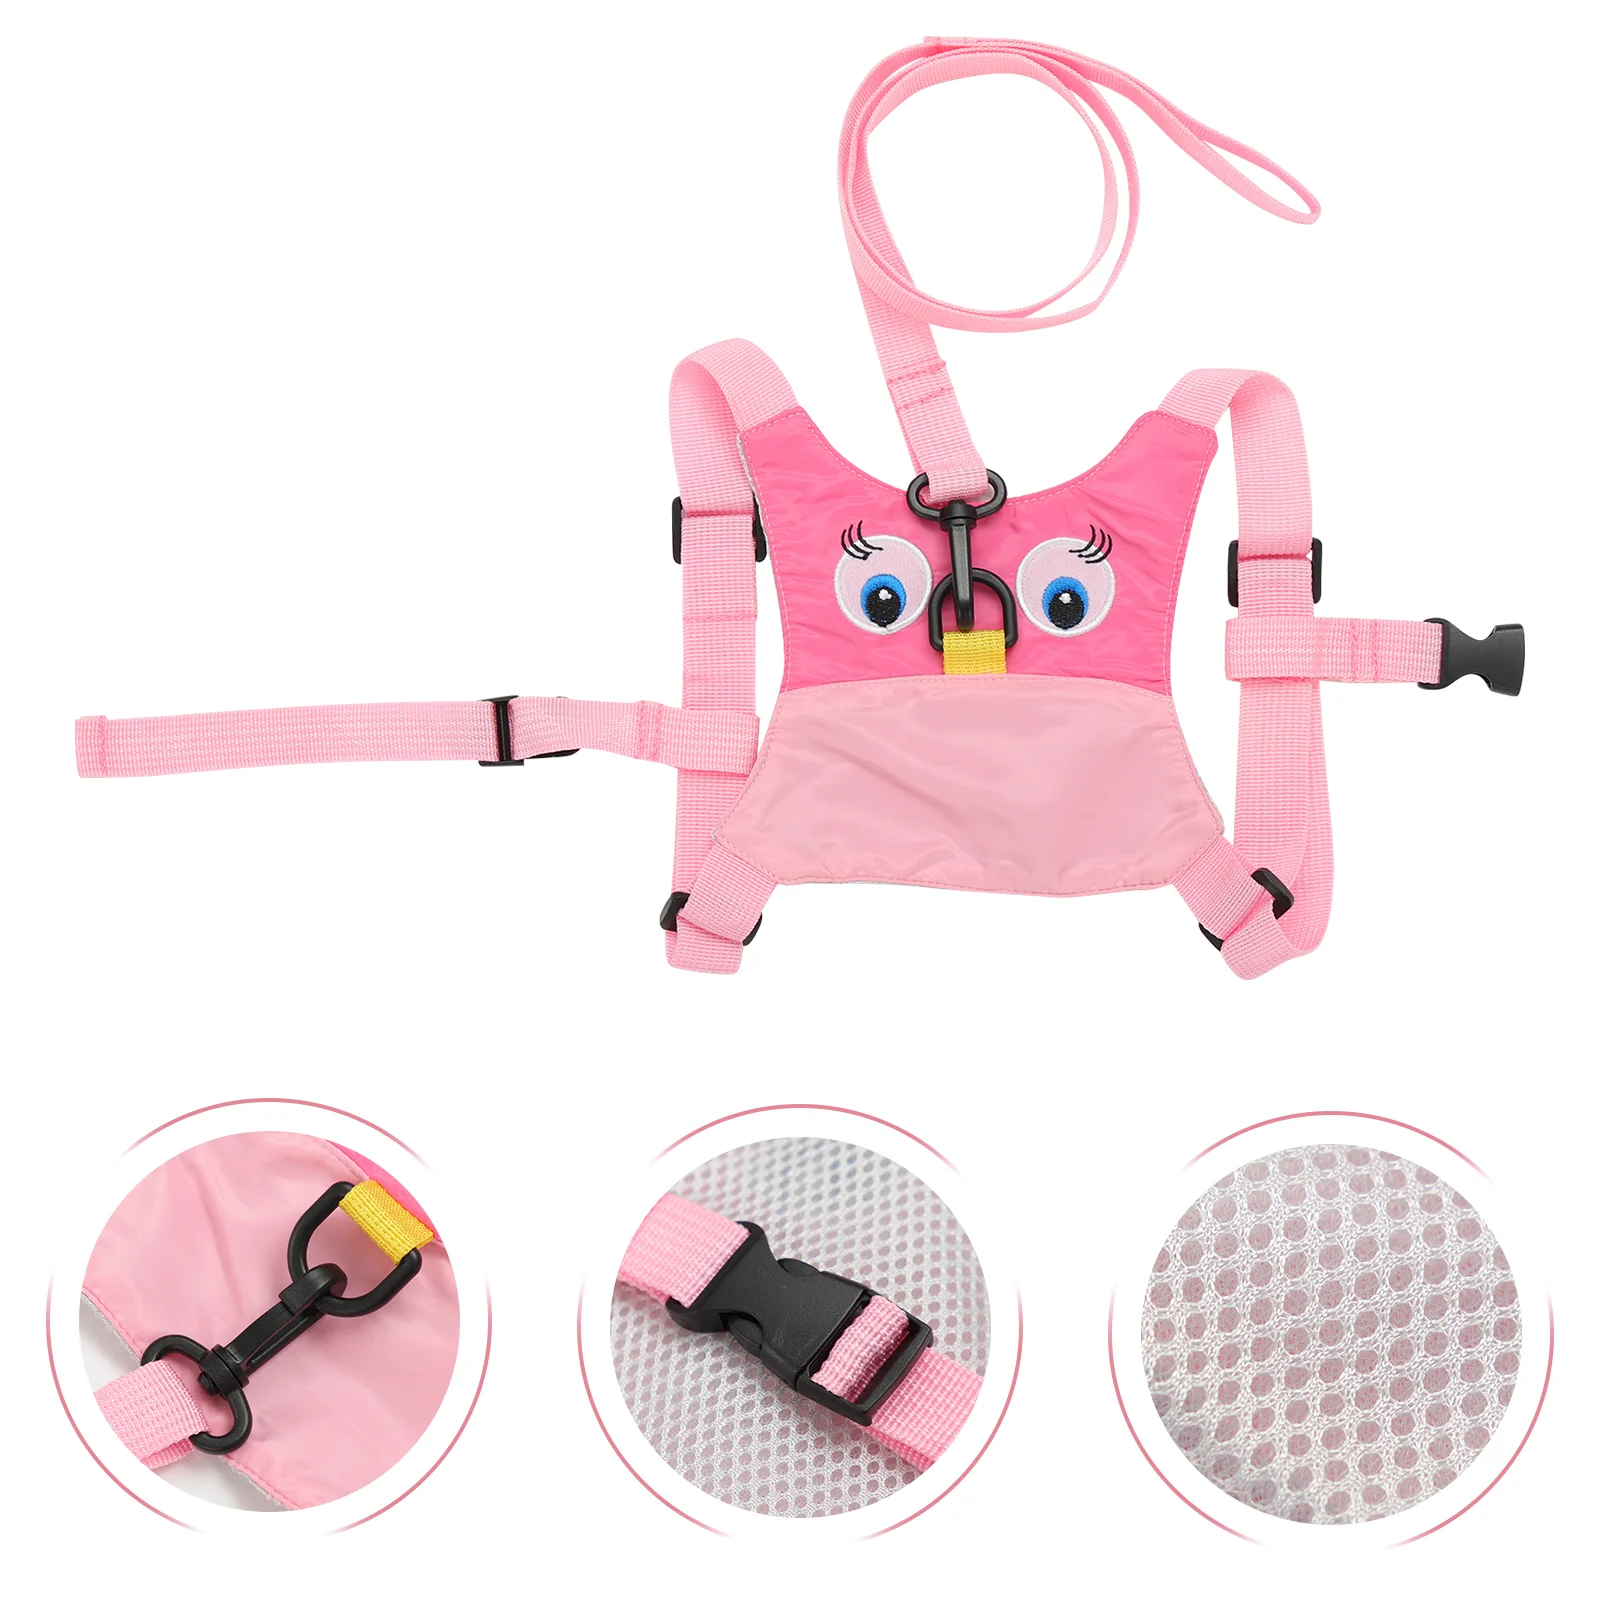 

Baby Leash Traction Rope Belt Toddler Harness Child Safety Anti Lost Leashes Cloth Kids Anti-lost Strap Carrier